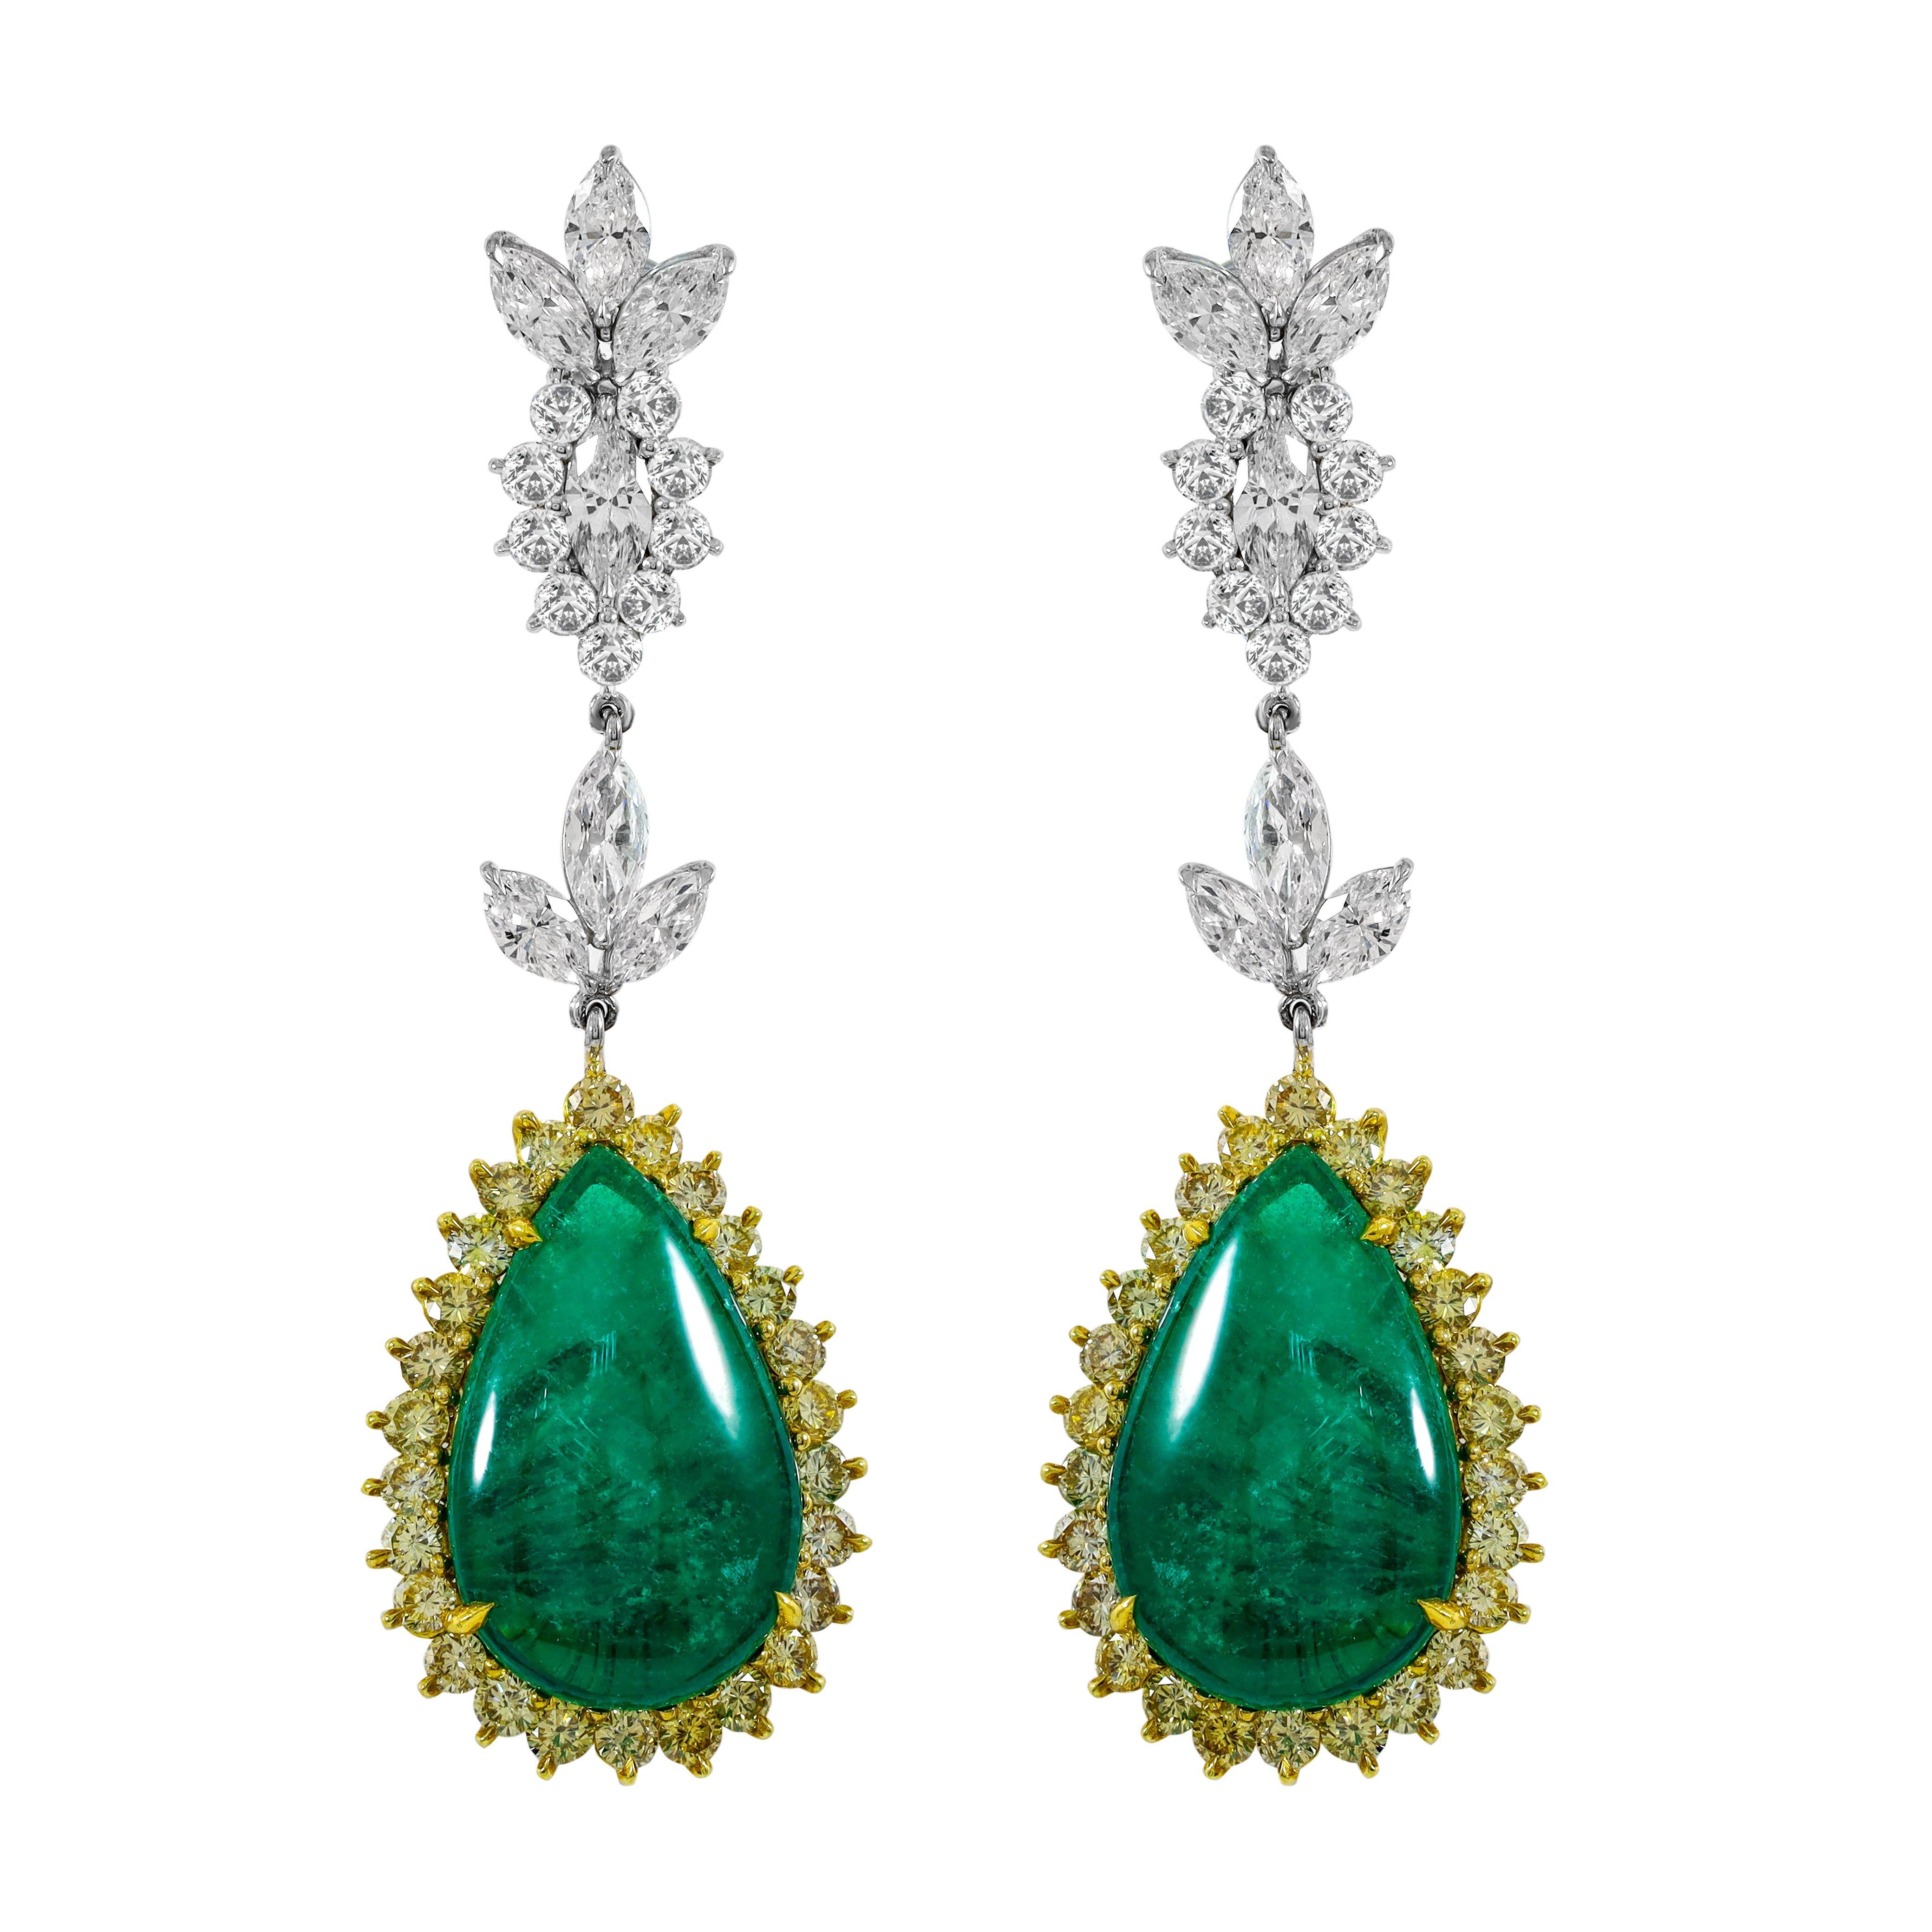 Pear Cut Diana M. GIA Certified 14.05 Carat Pear Shaped Emerald and Diamond Earrings For Sale